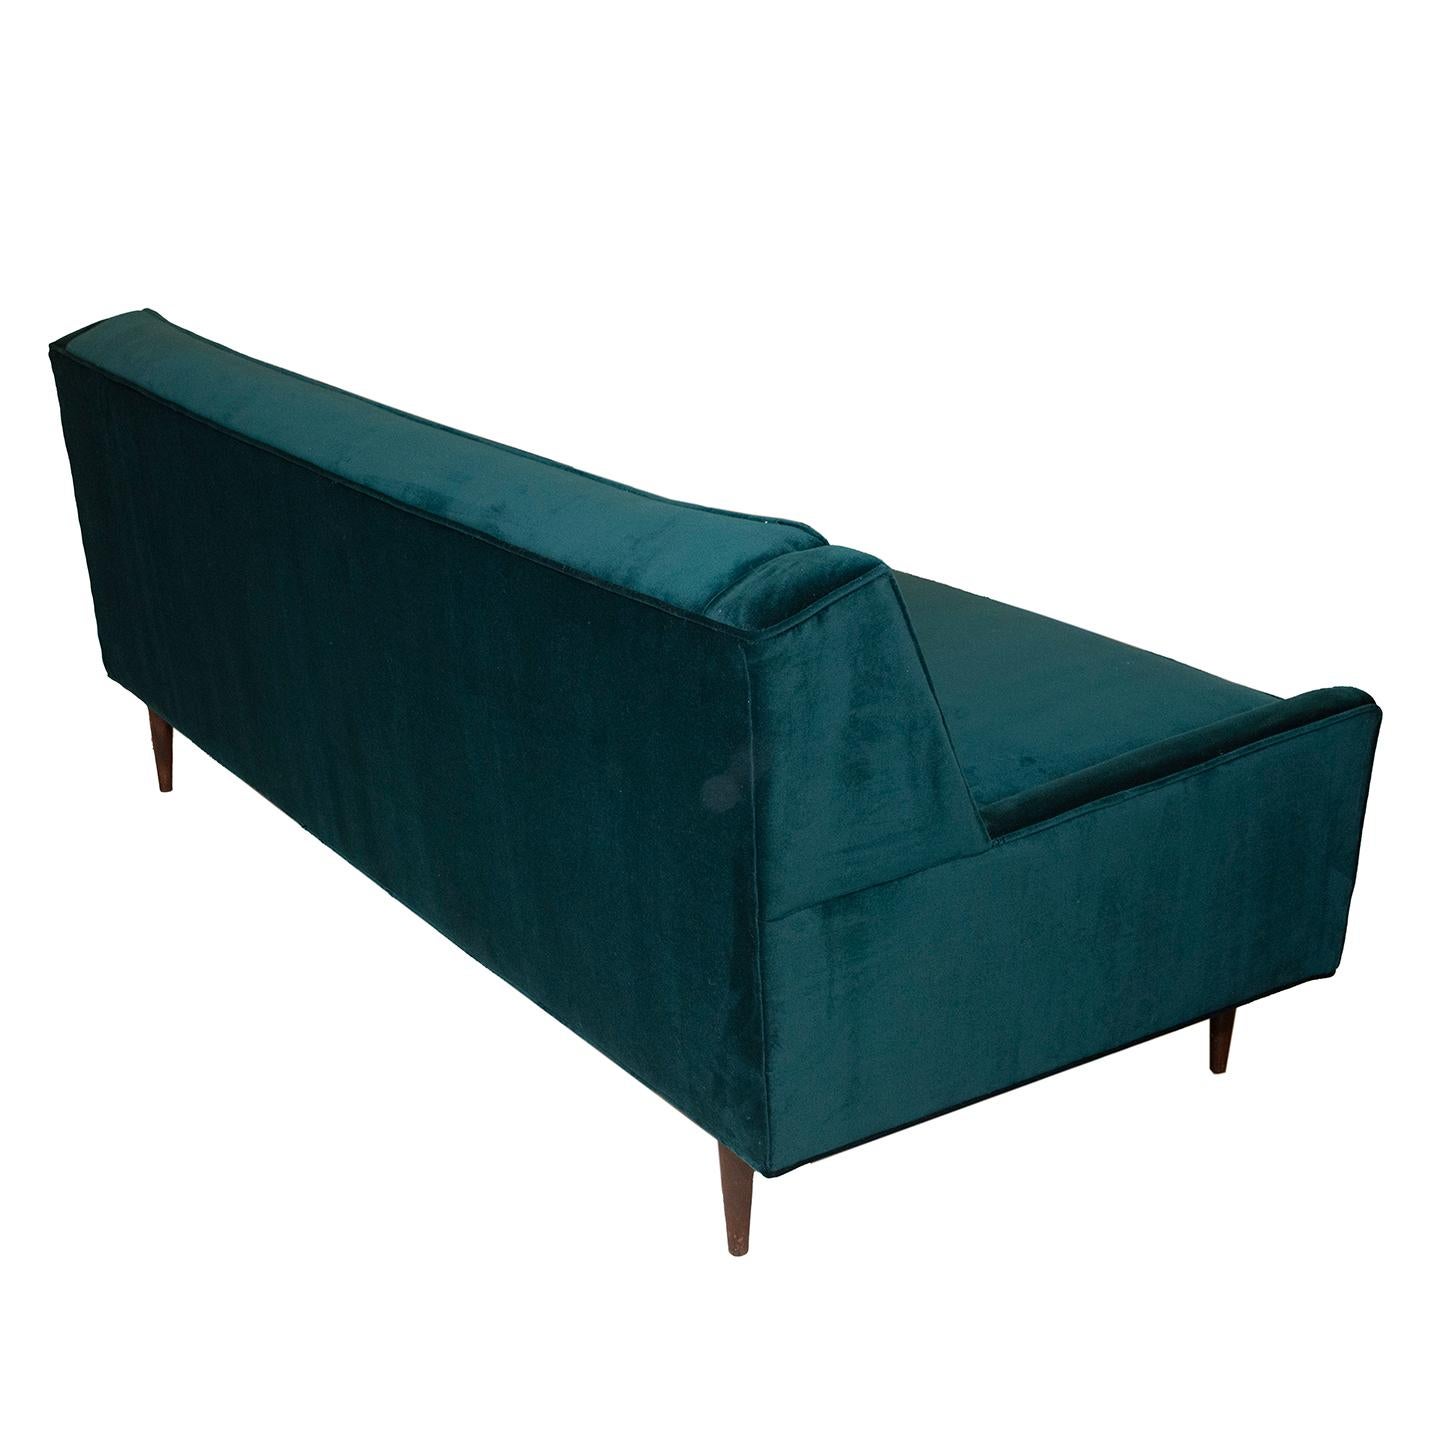 Knoll Era Sofa in Emerald Green Performance Velvet In Excellent Condition For Sale In Wilton, CT